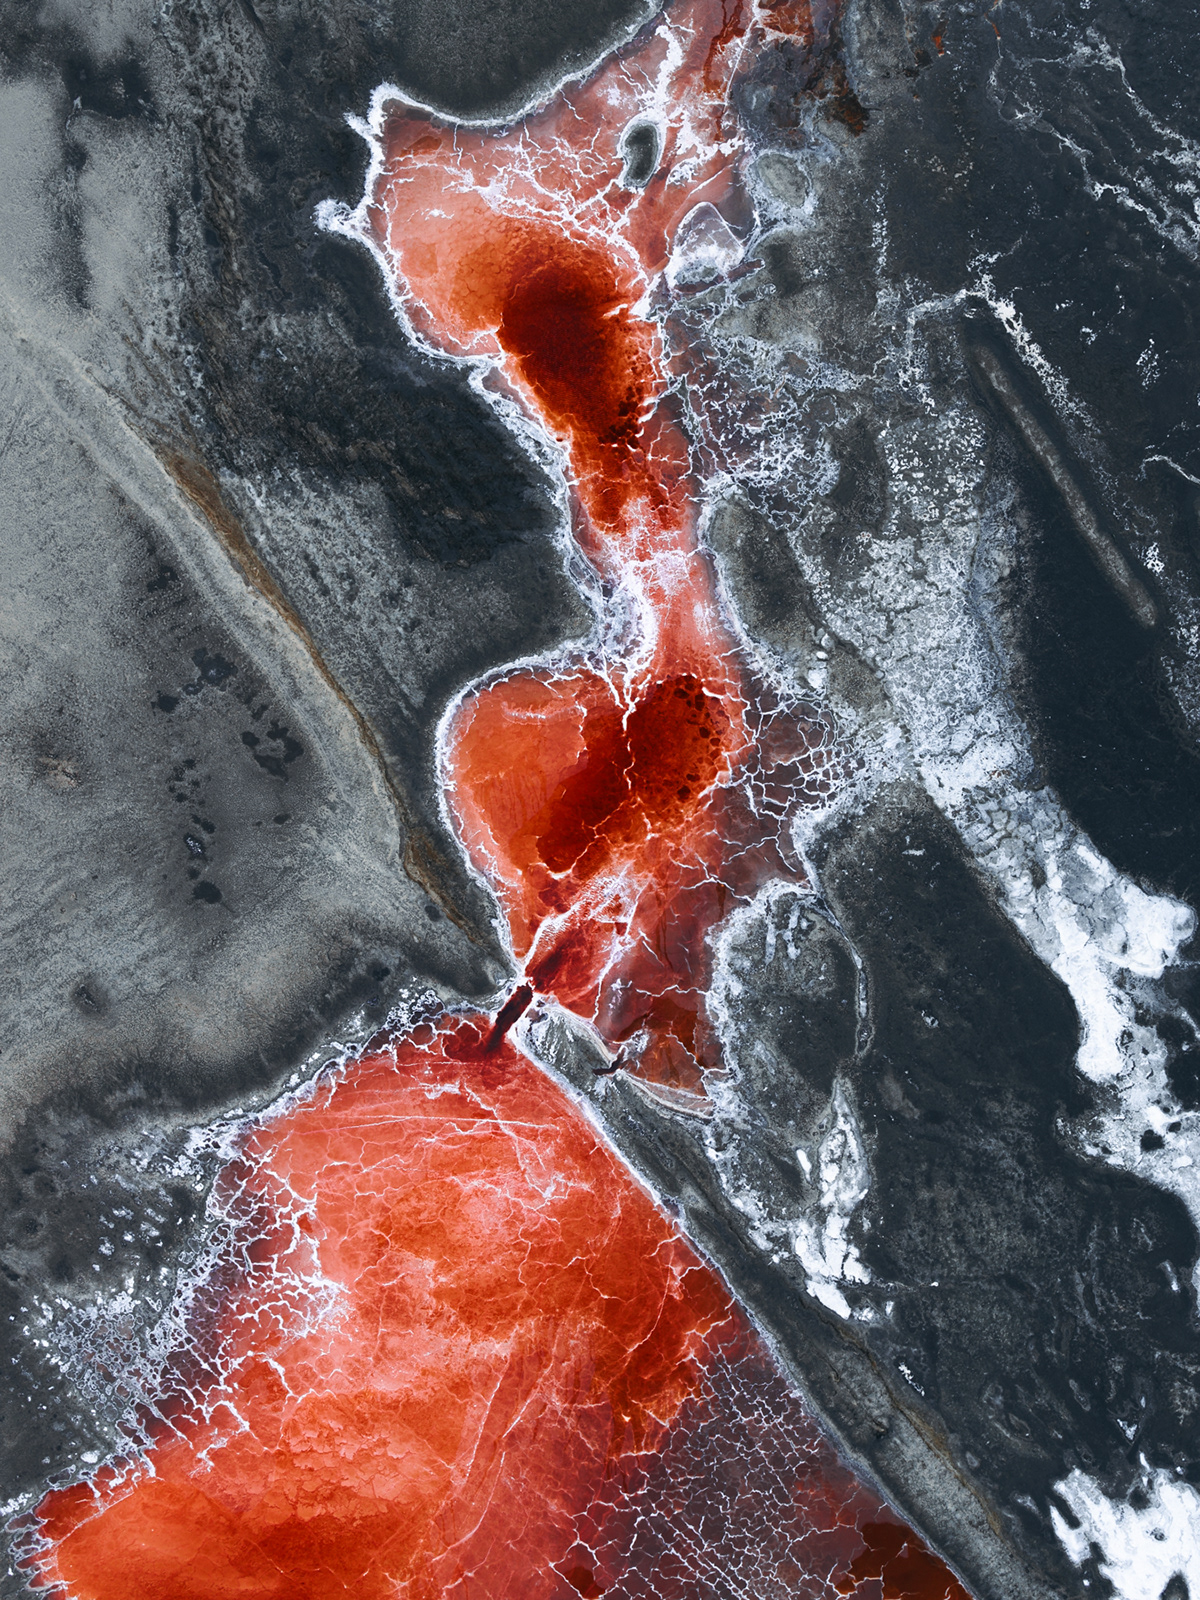 Aerial Aerial Photography abstract environment Borax red art